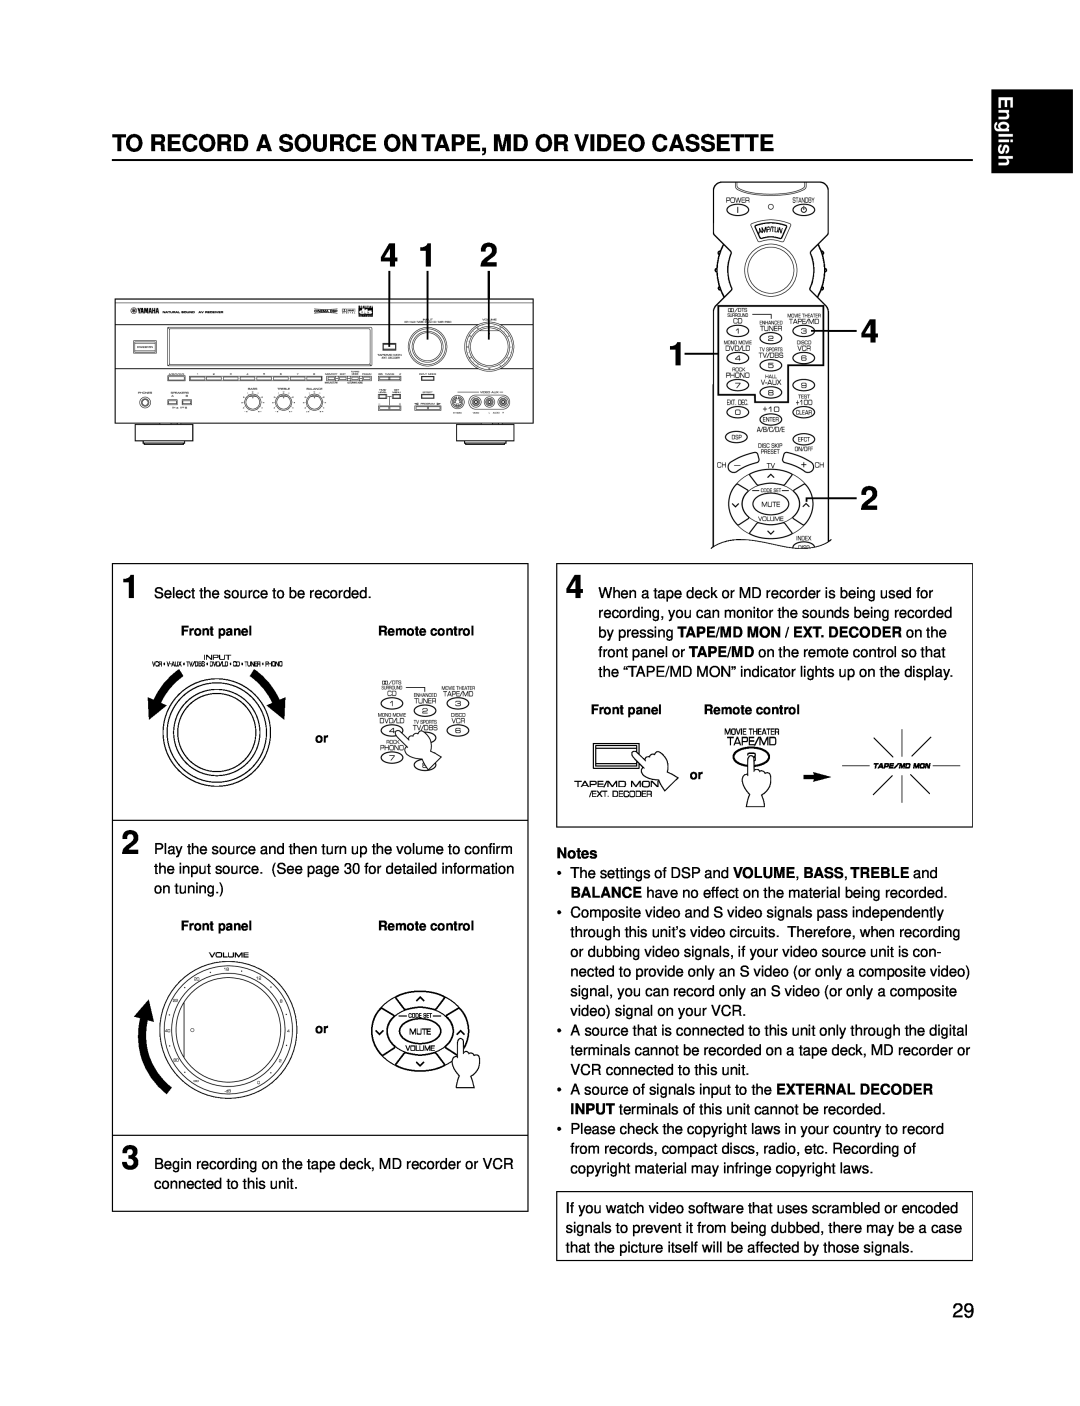 Yamaha RX-V595A owner manual To Record A Source On Tape, Md Or Video Cassette, English 